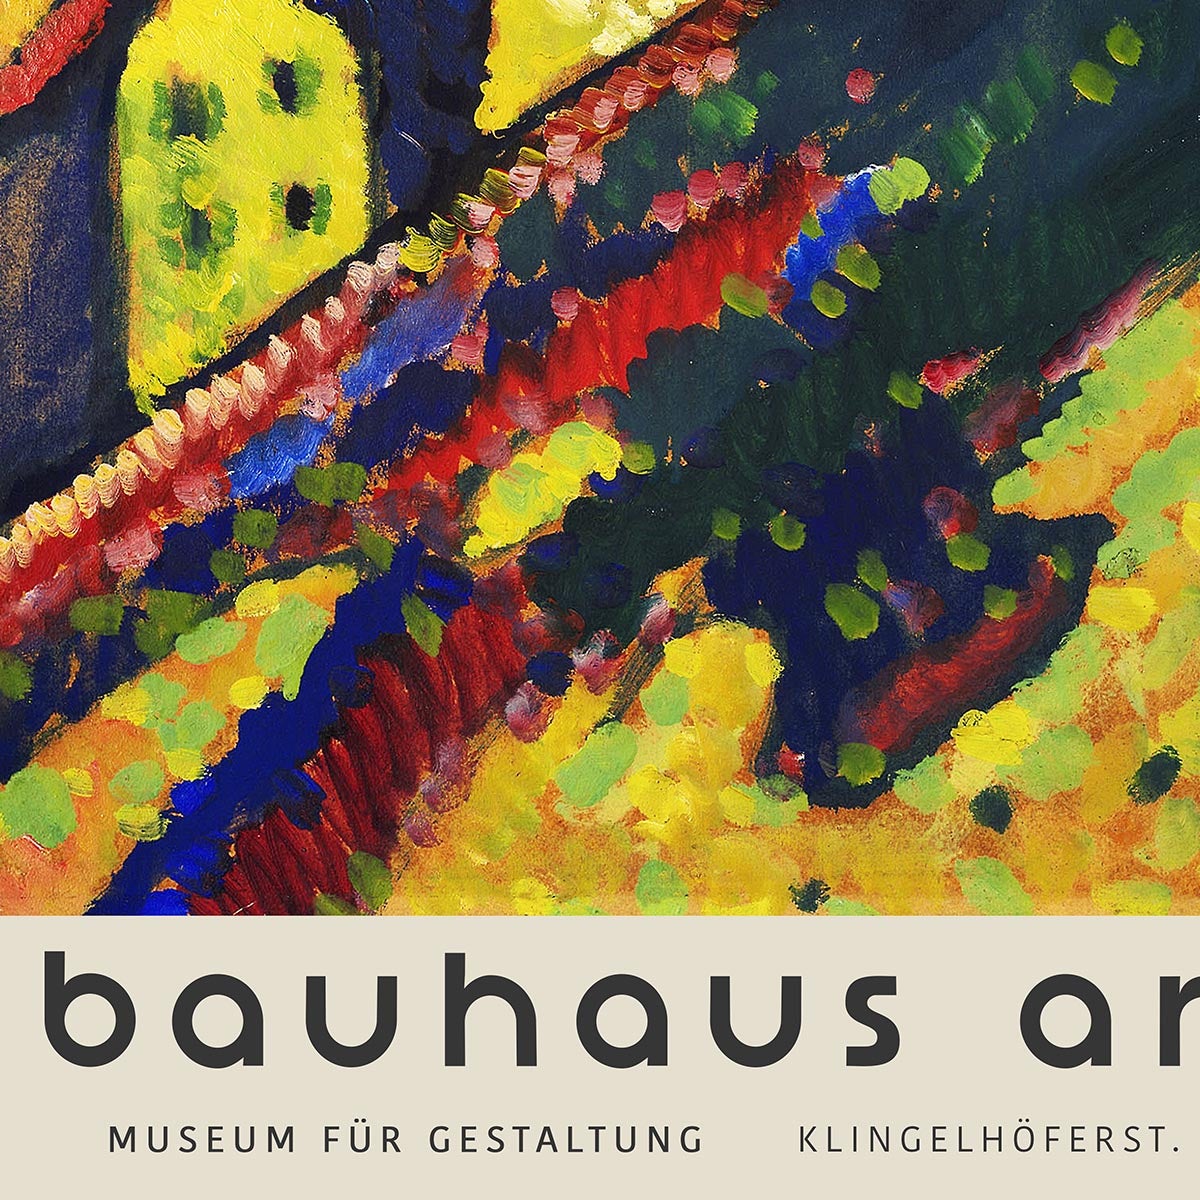 Houses at Murnau by Wassily Kandinsky Exhibition Poster